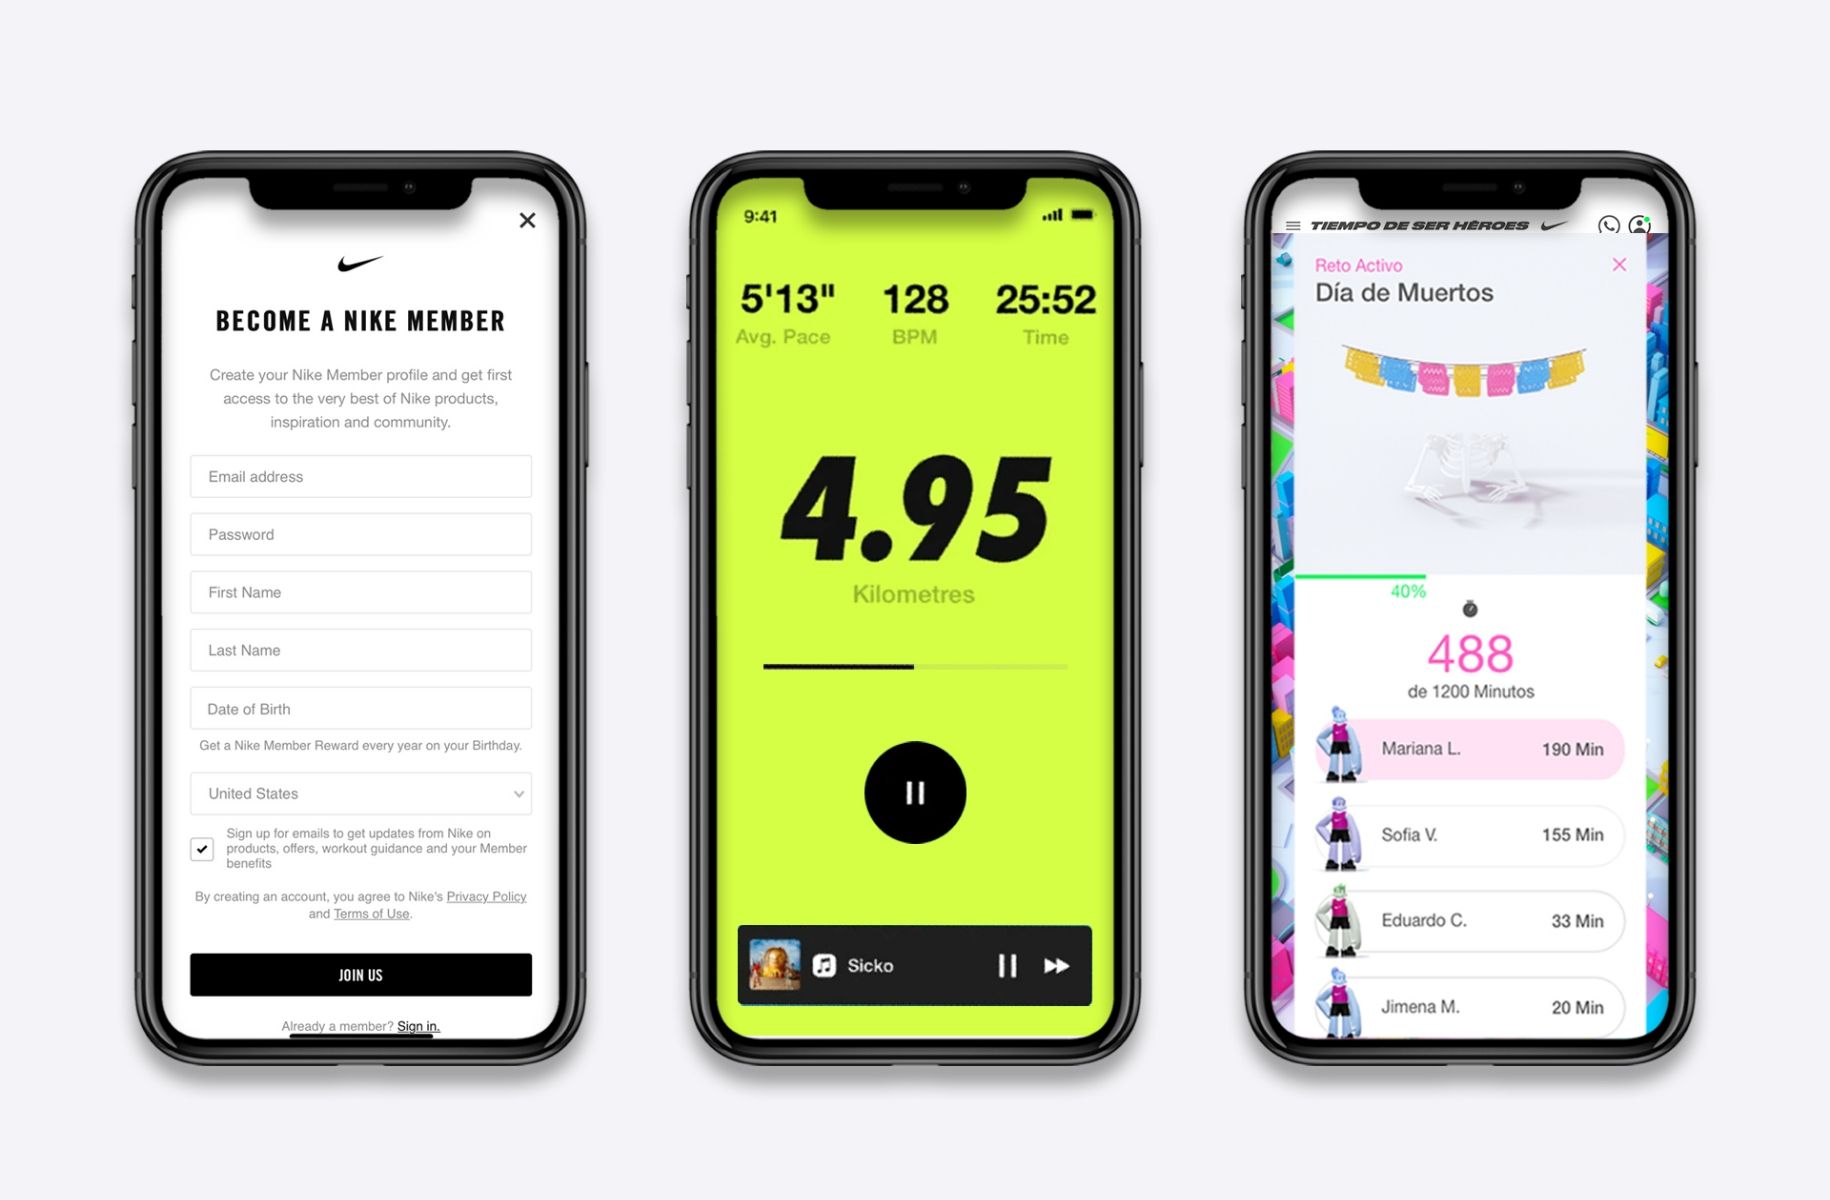 Three phone screens. First showing become a nike member sign up page. Second showing Nike running app. Third showing Tiempo der ser heroes scoreboard